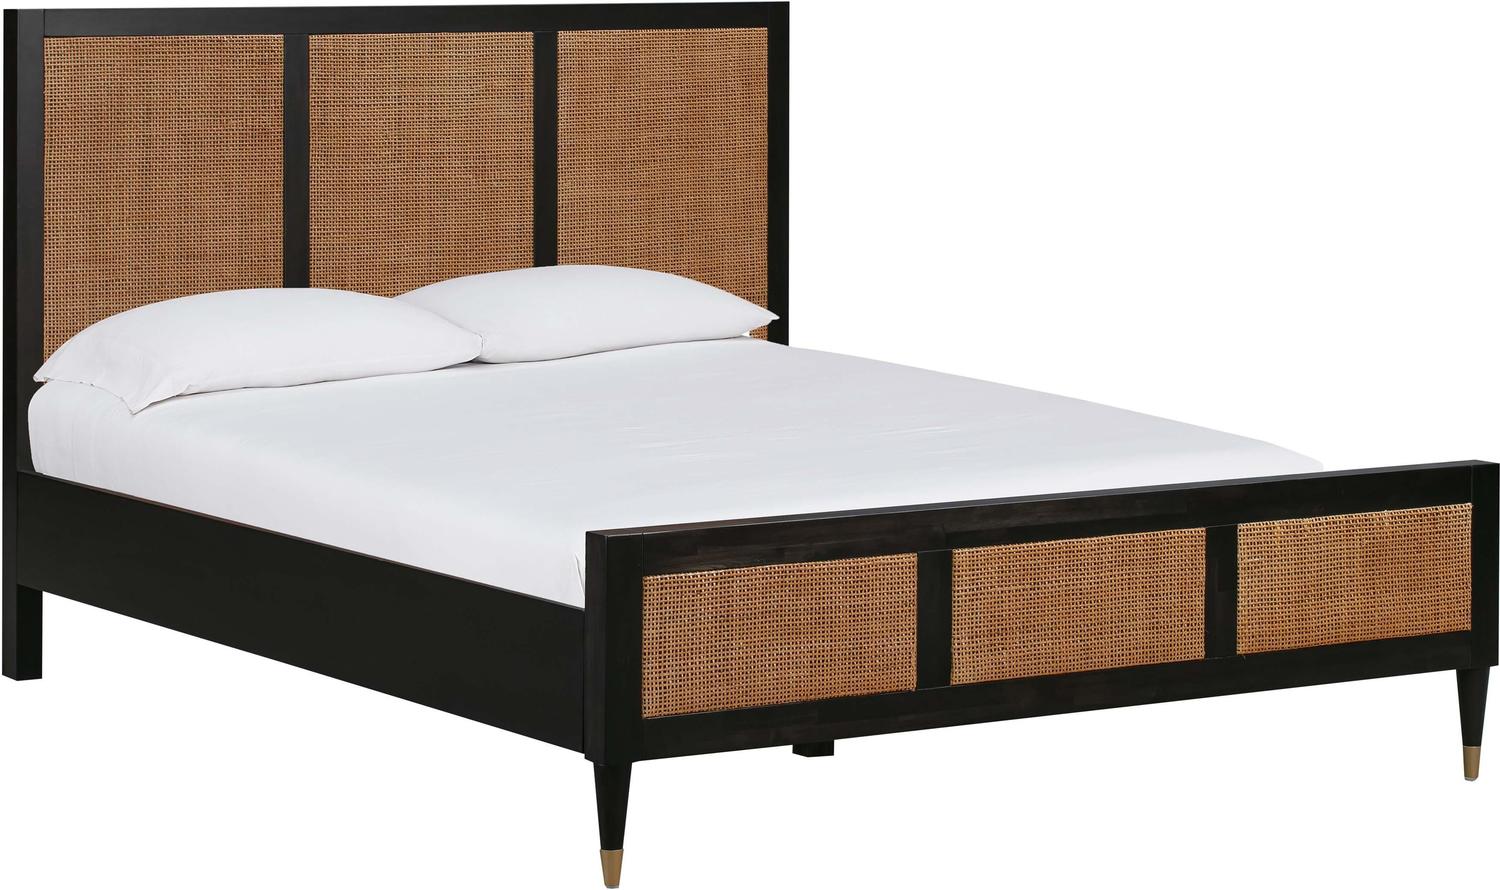 cheap twin bedroom sets Contemporary Design Furniture Beds Black